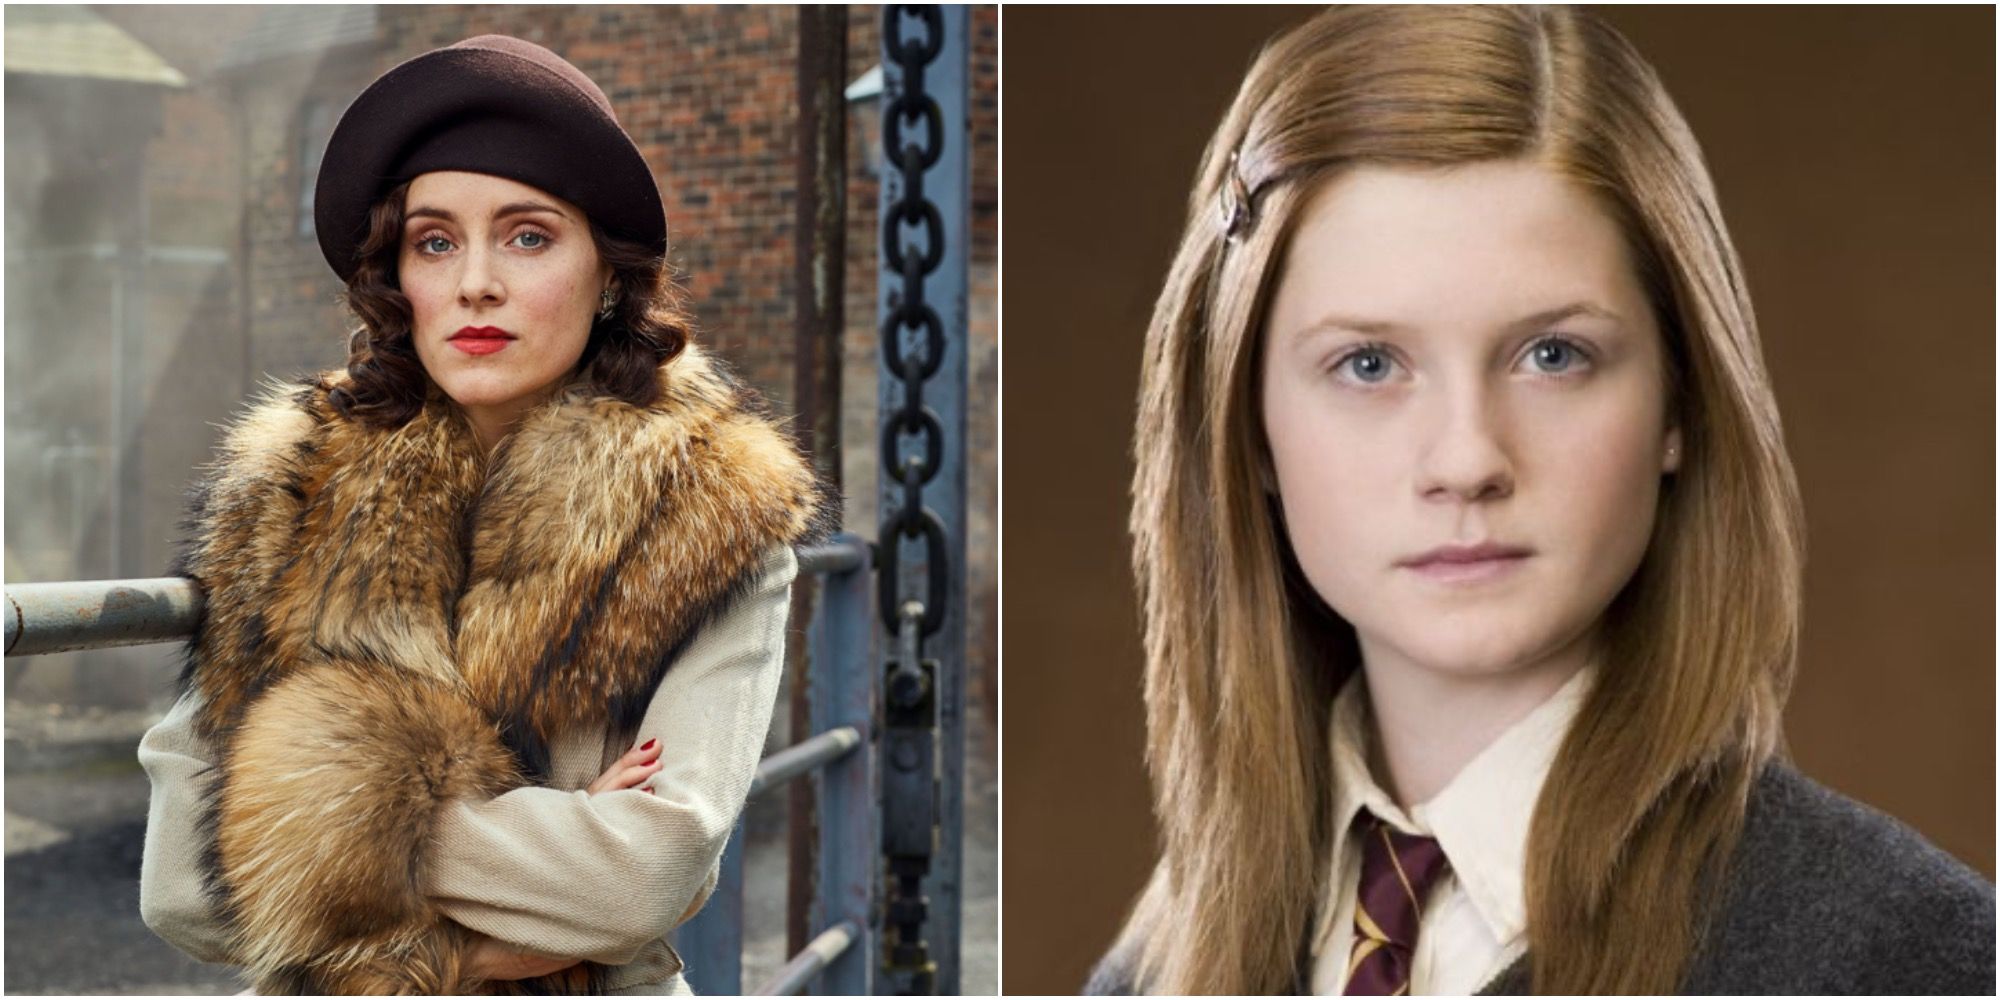 Split image of Ada Shelby (Peaky Blinders) and Ginny Weasley (Harry Potter)